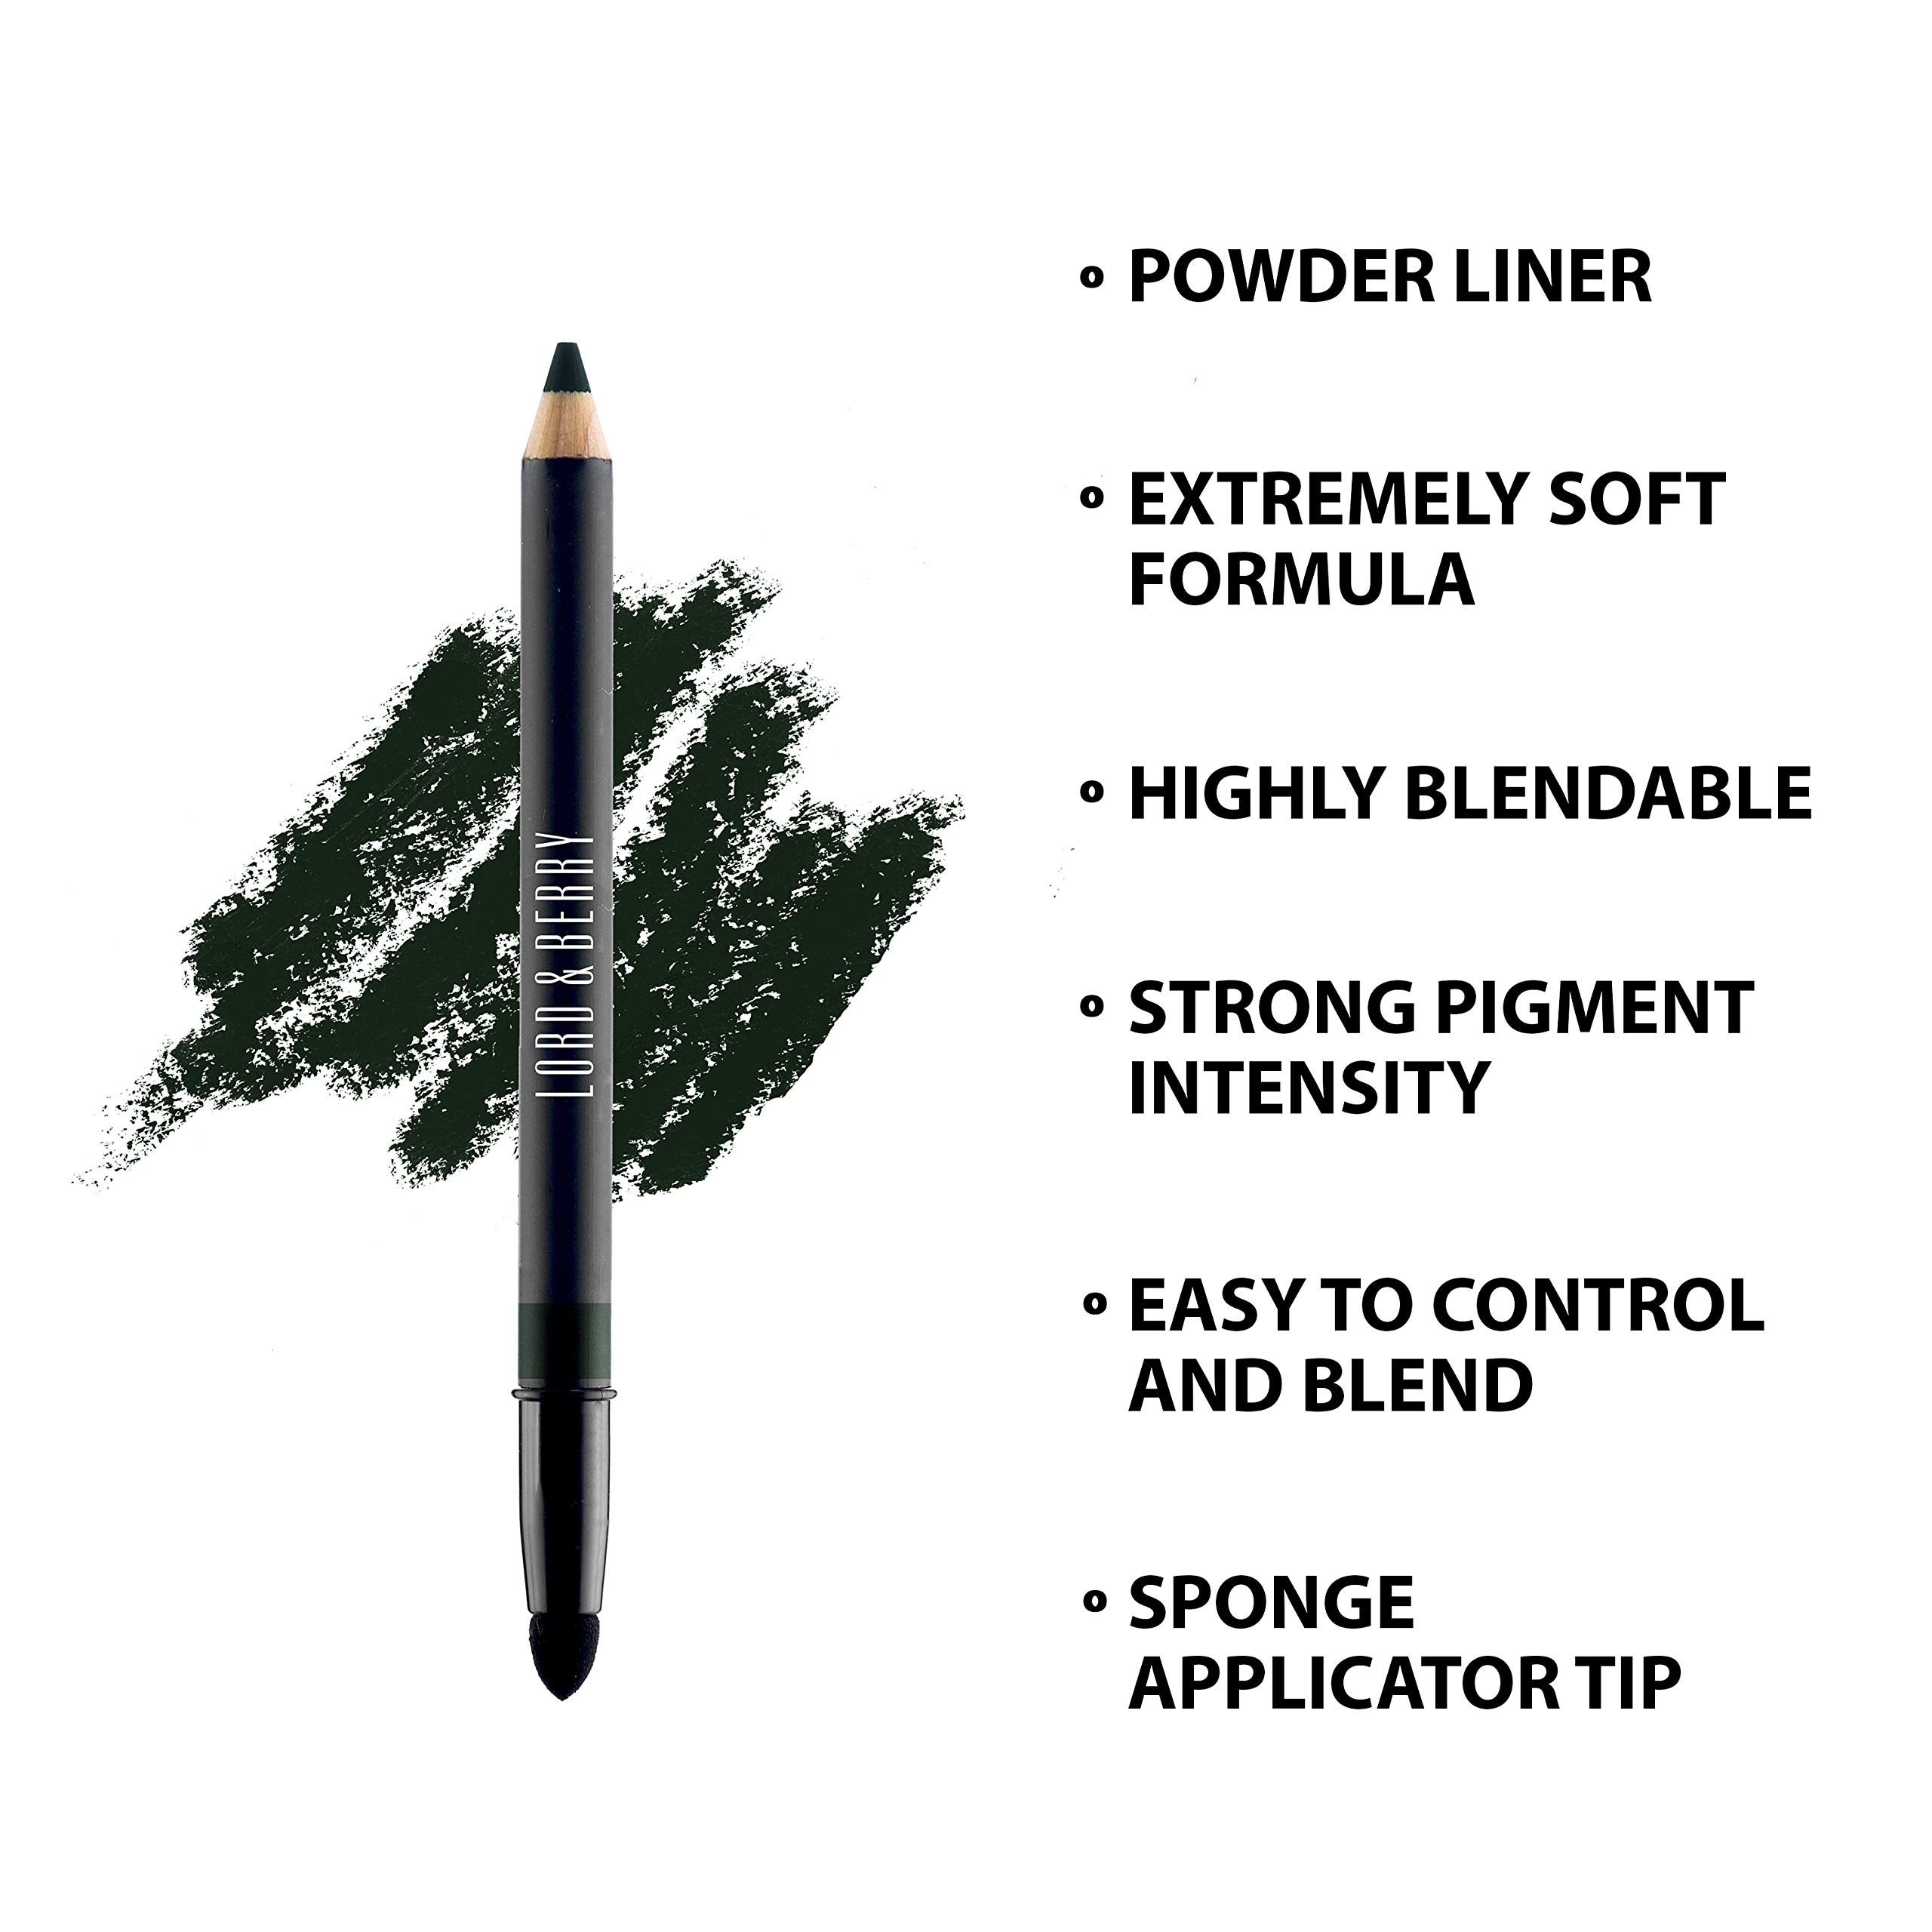 Lord & Berry VELLUTO - Powdery Smooth Shadow Eyeliner Pencil, Soft Smooth & Long Lasting Weightless Formula With Blending Tip Eye Liner - Easy To Use Eye Makeup